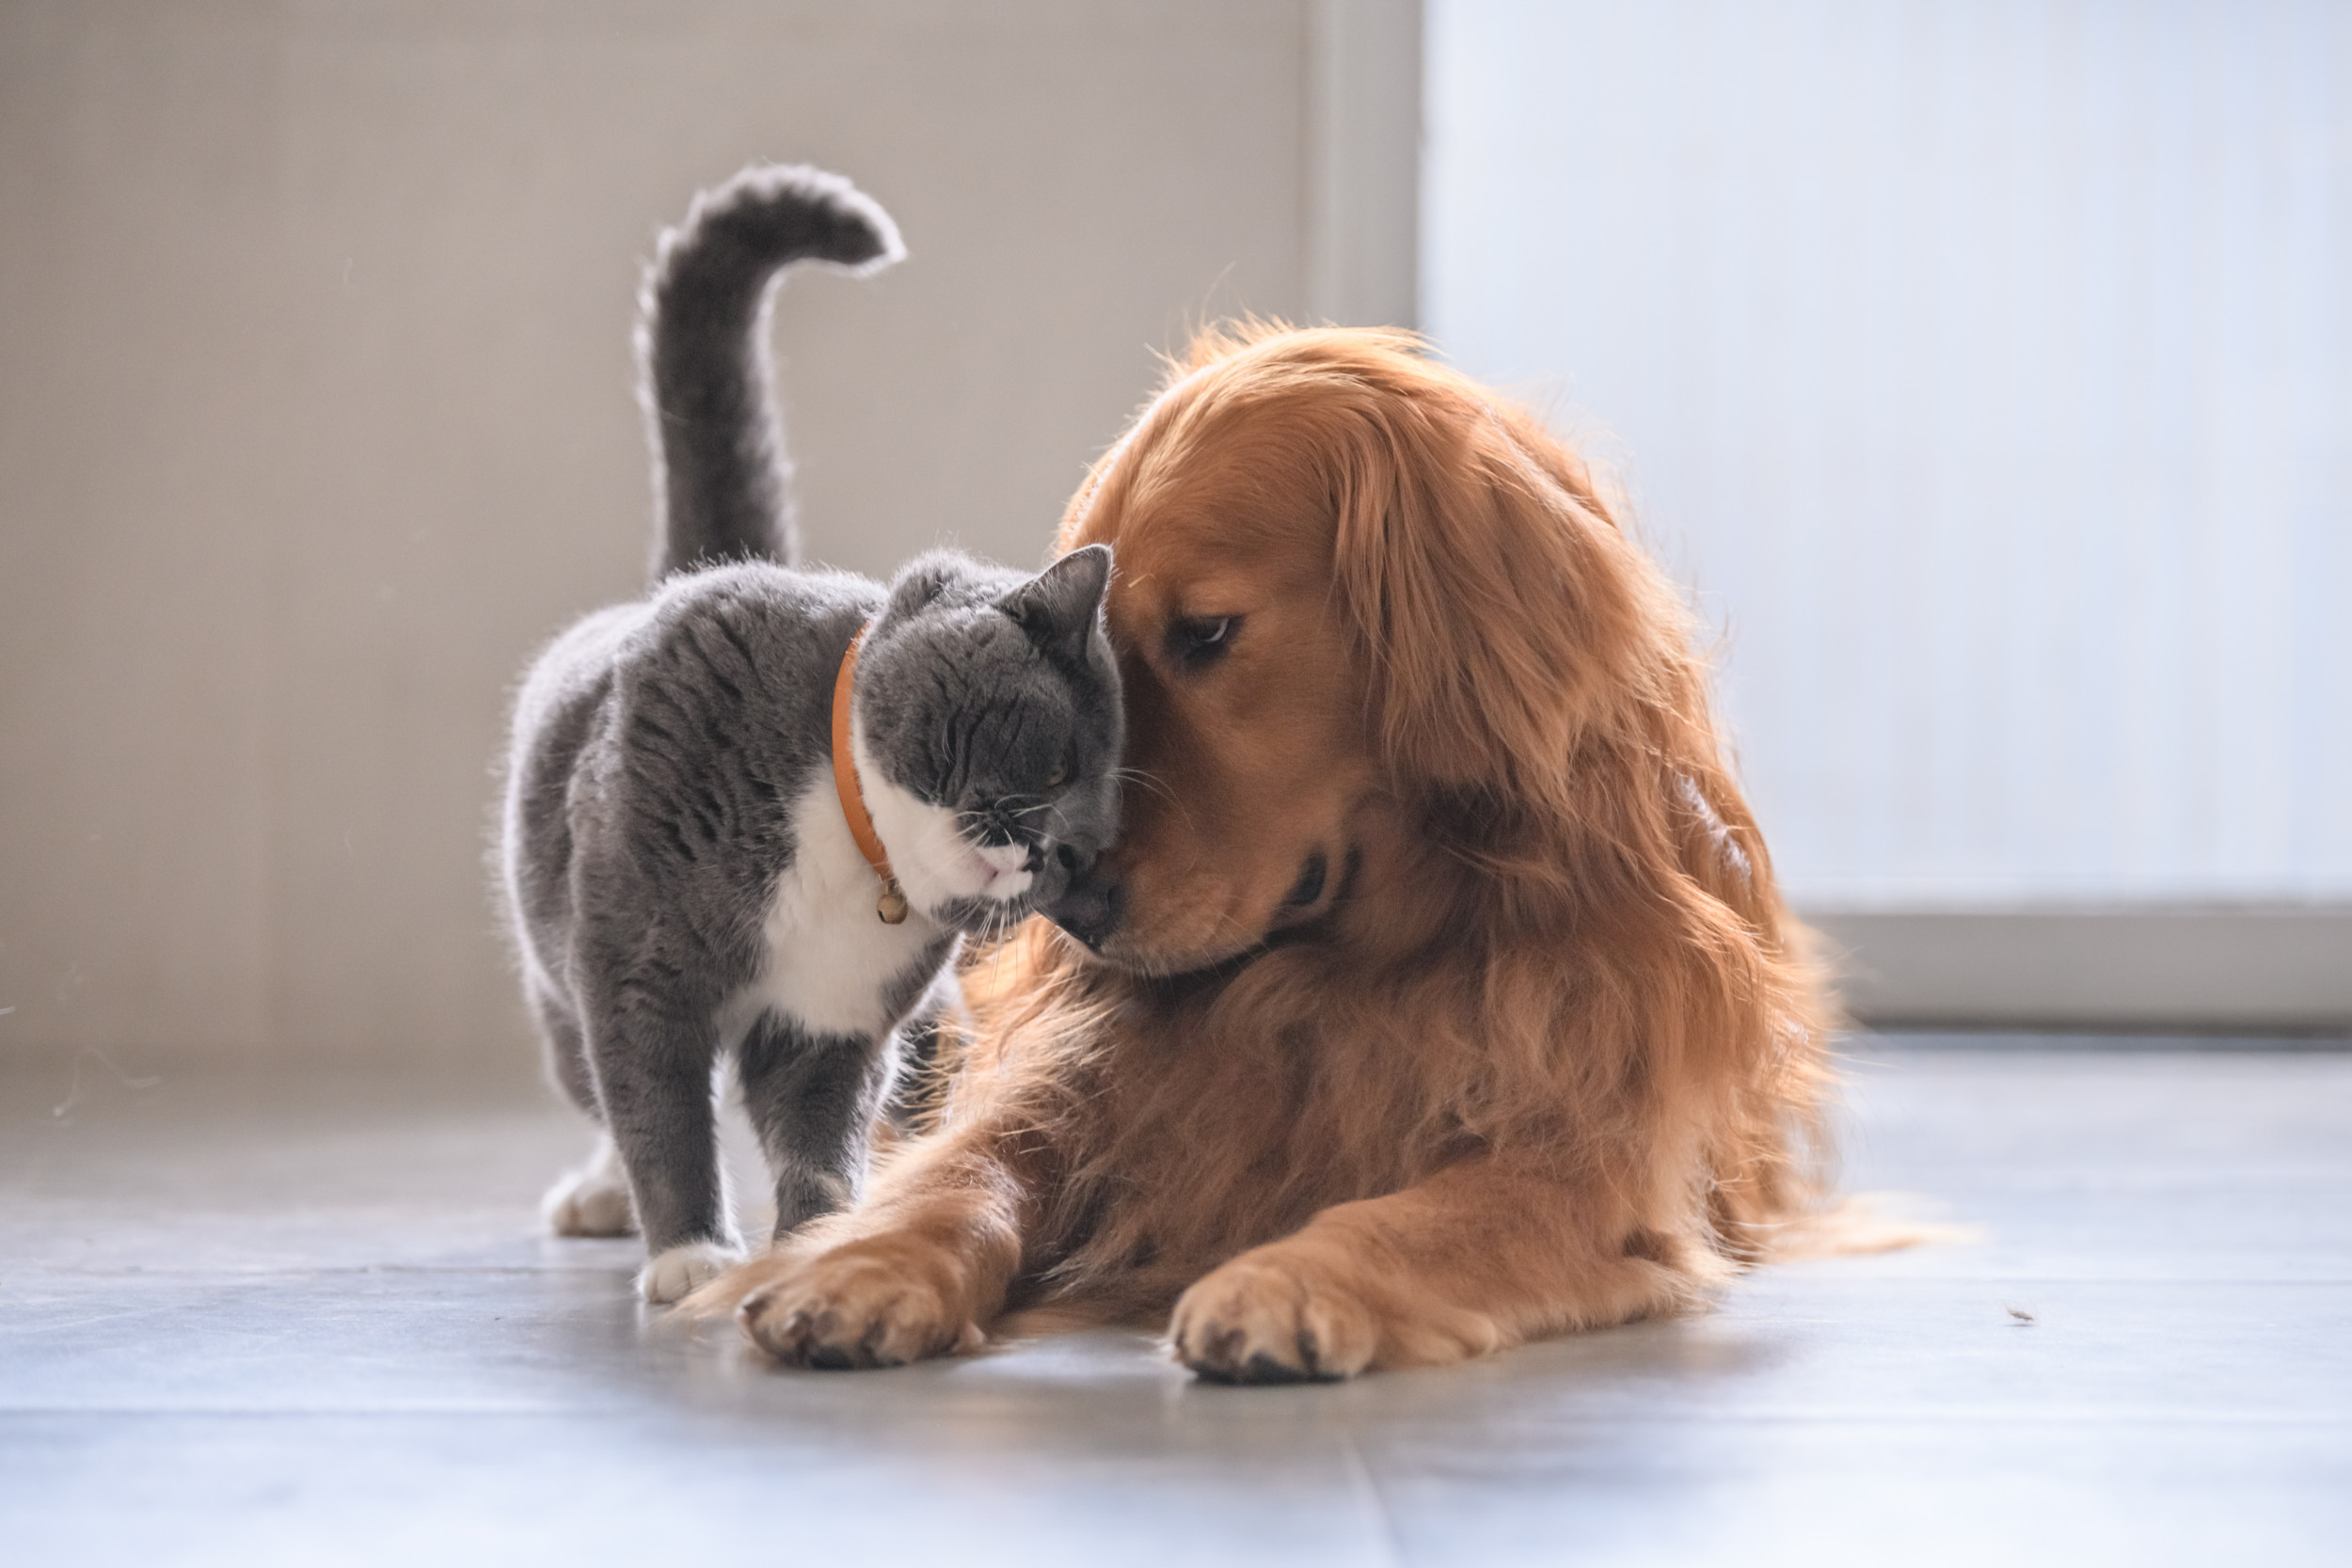 Cat and Dog Wrap Each Other In Hug In 'Wholesome' Video: 'You're Mine Meow'